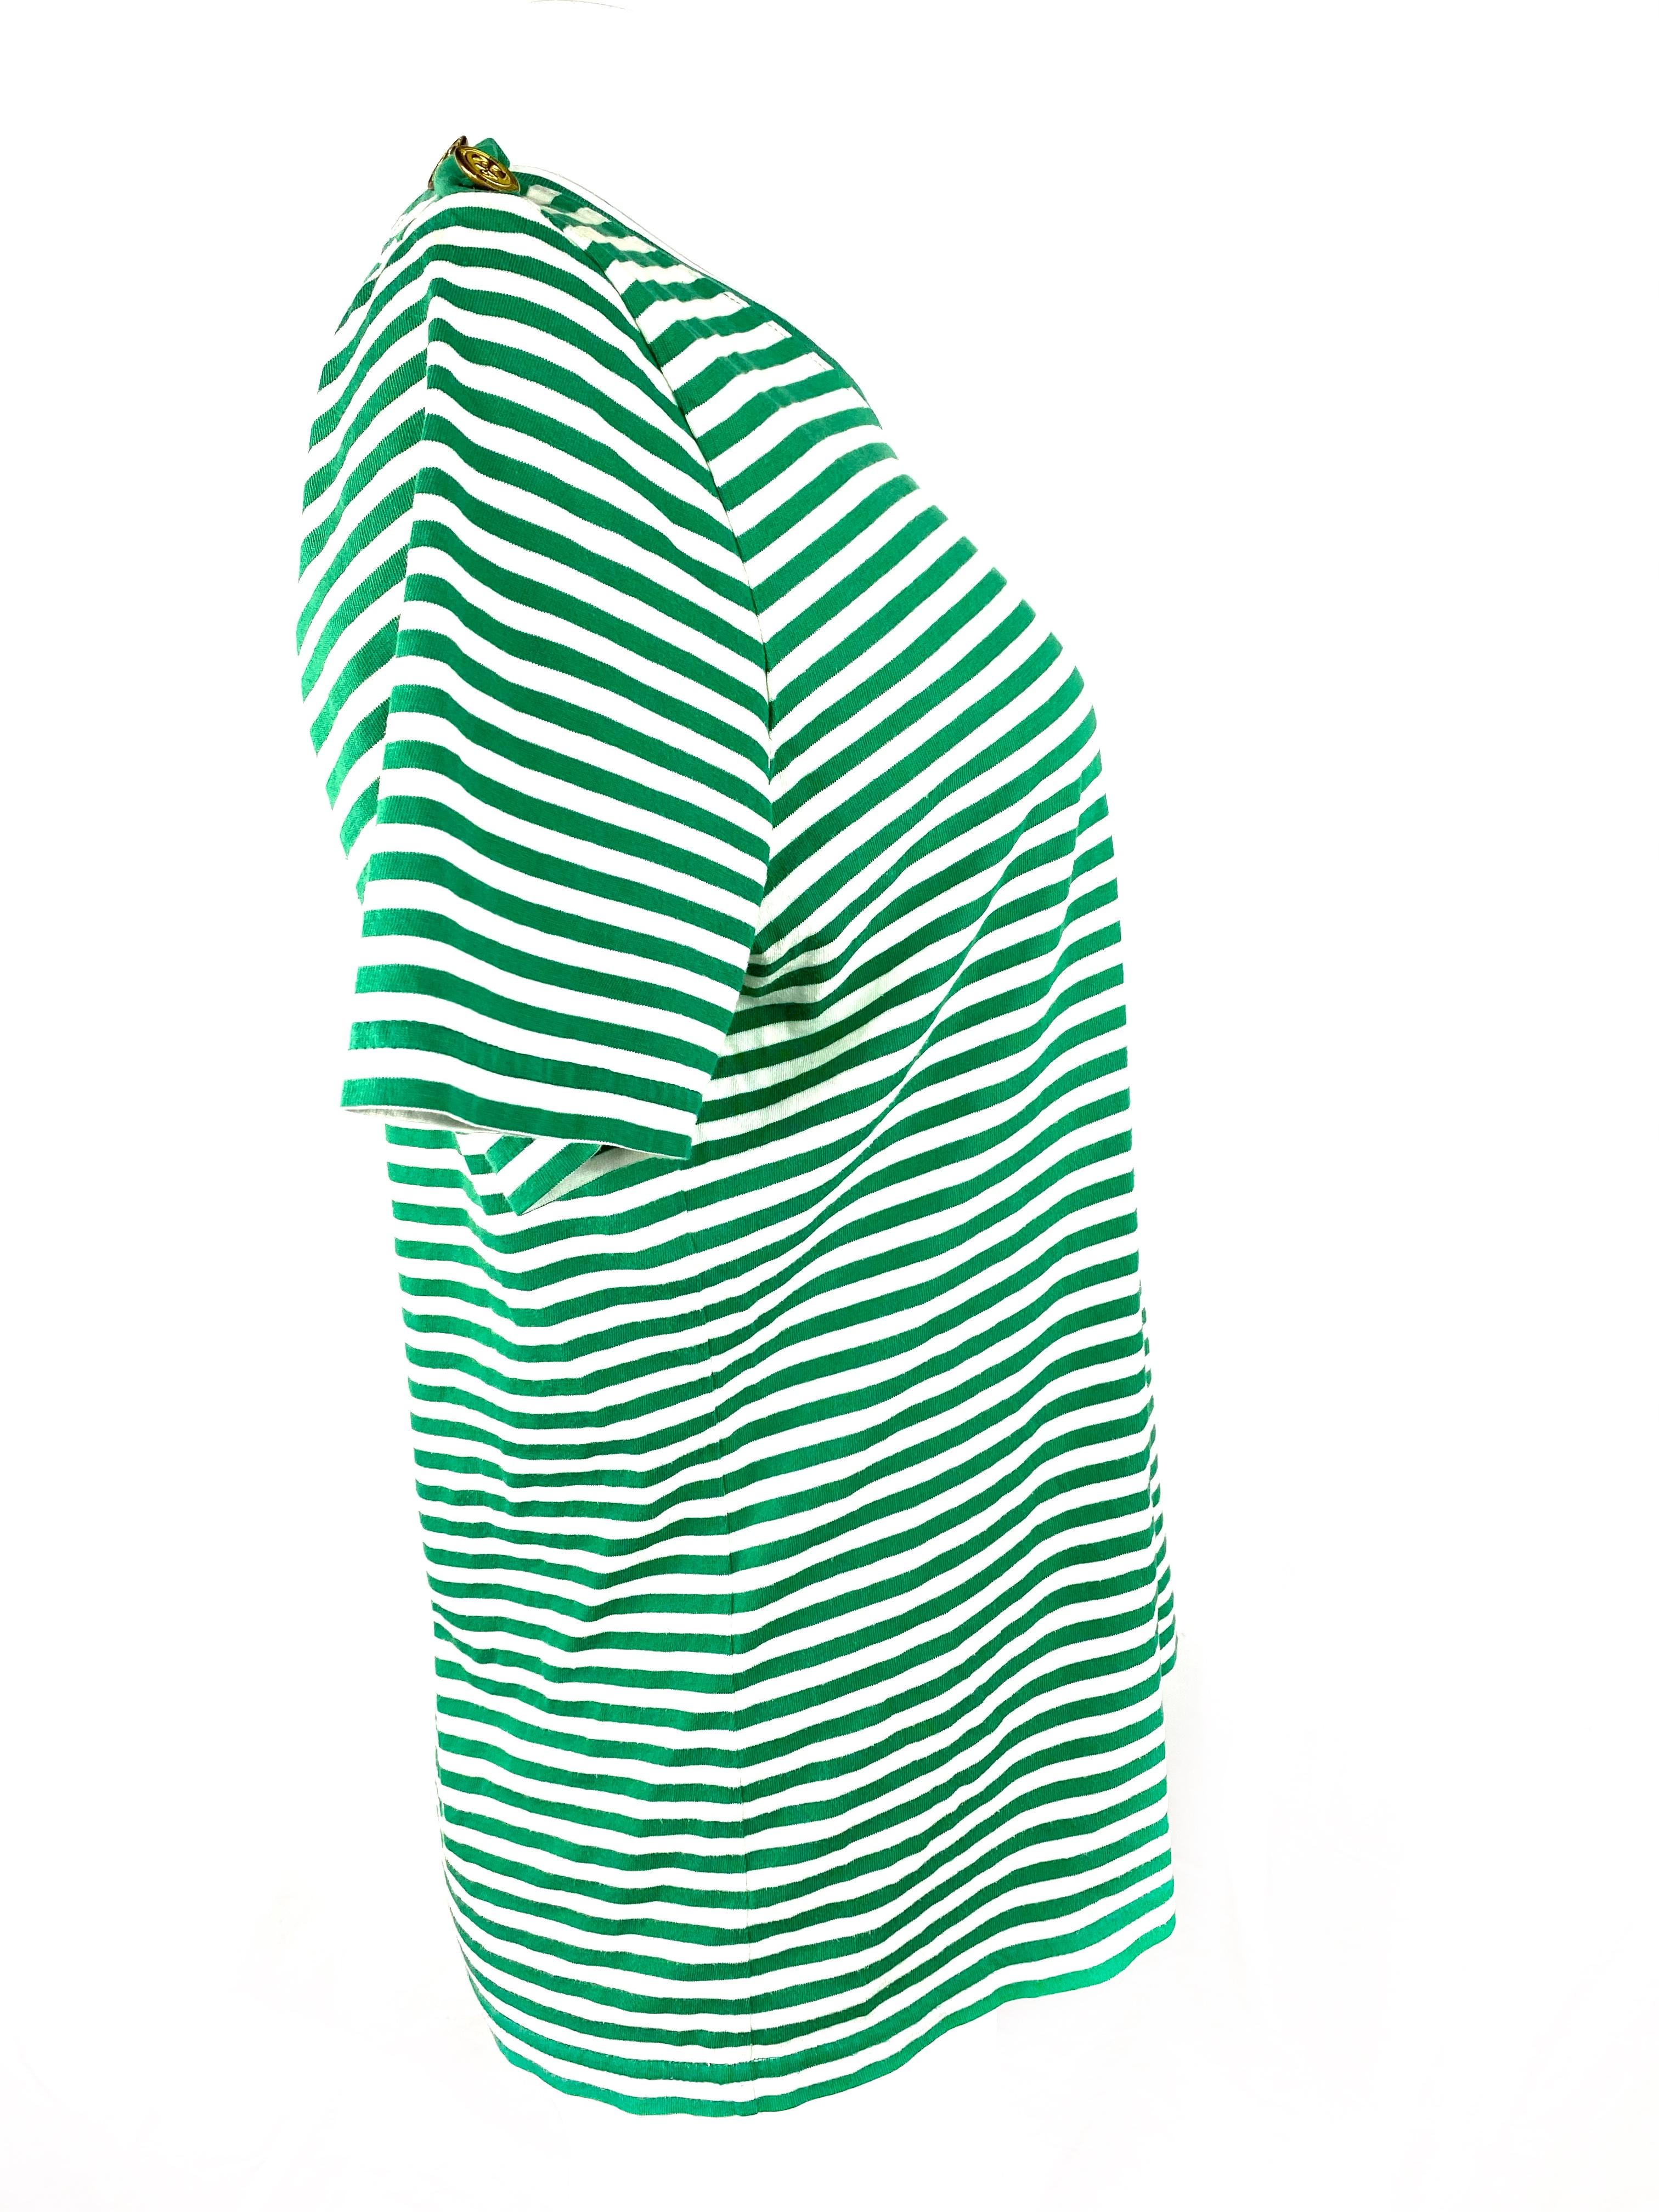 Royal Mer Bretange White and Green Striped T- Shirt, Size 46 For Sale ...